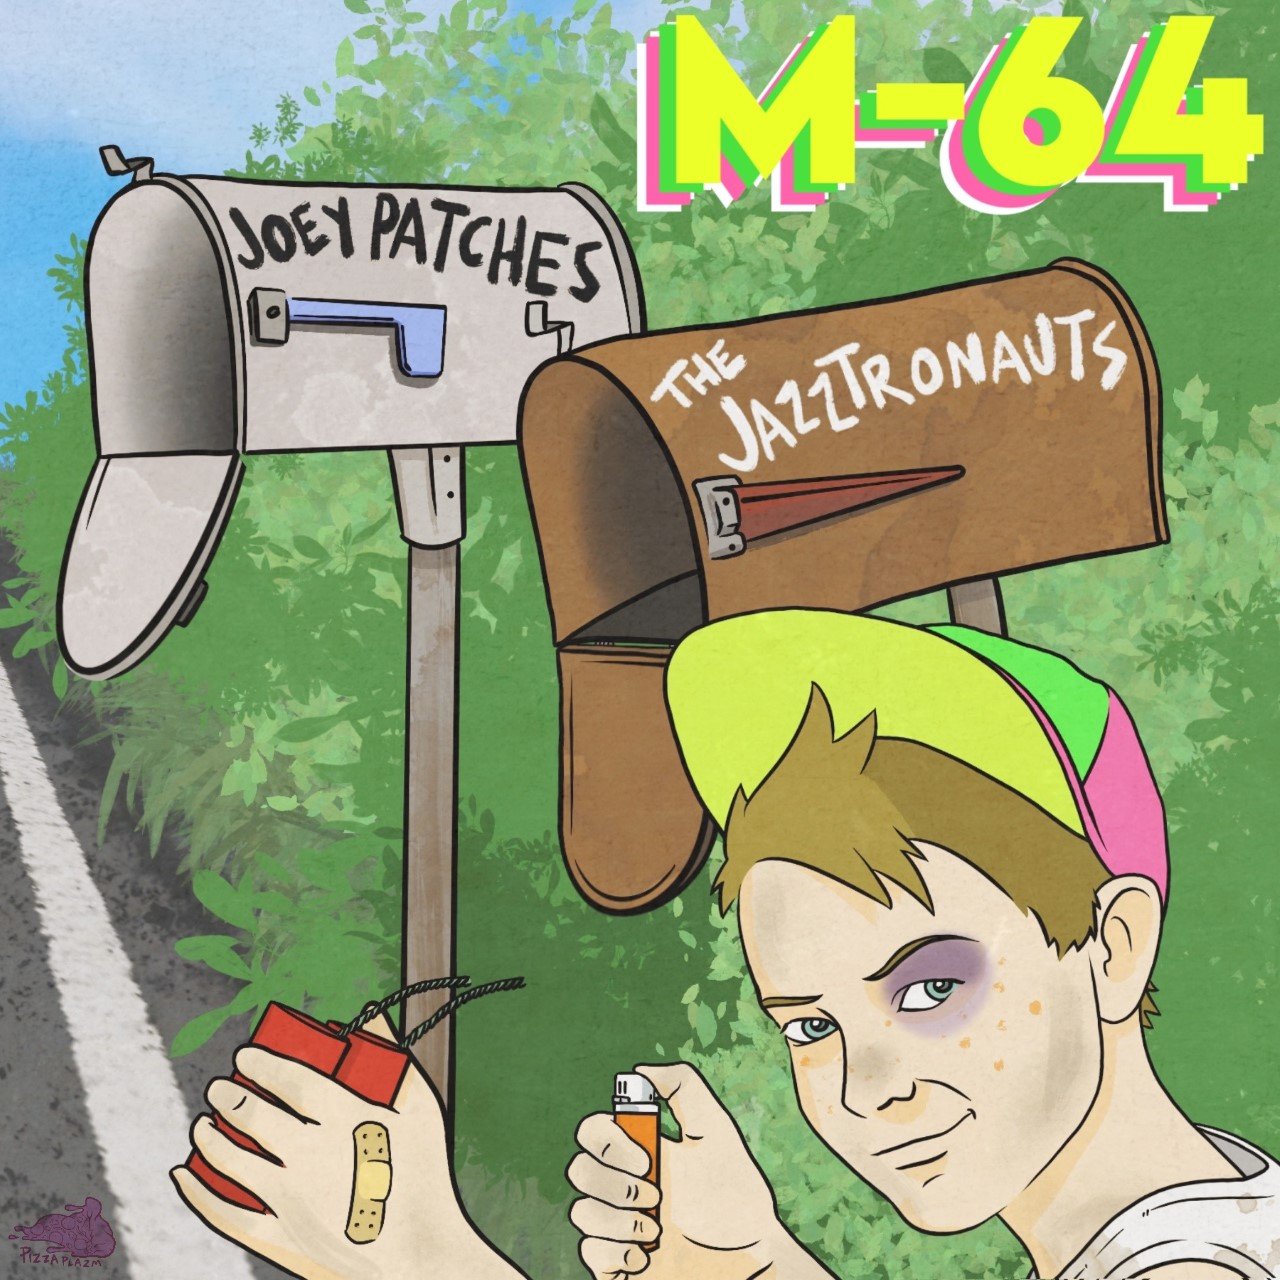 JOEY PATCHES M-64